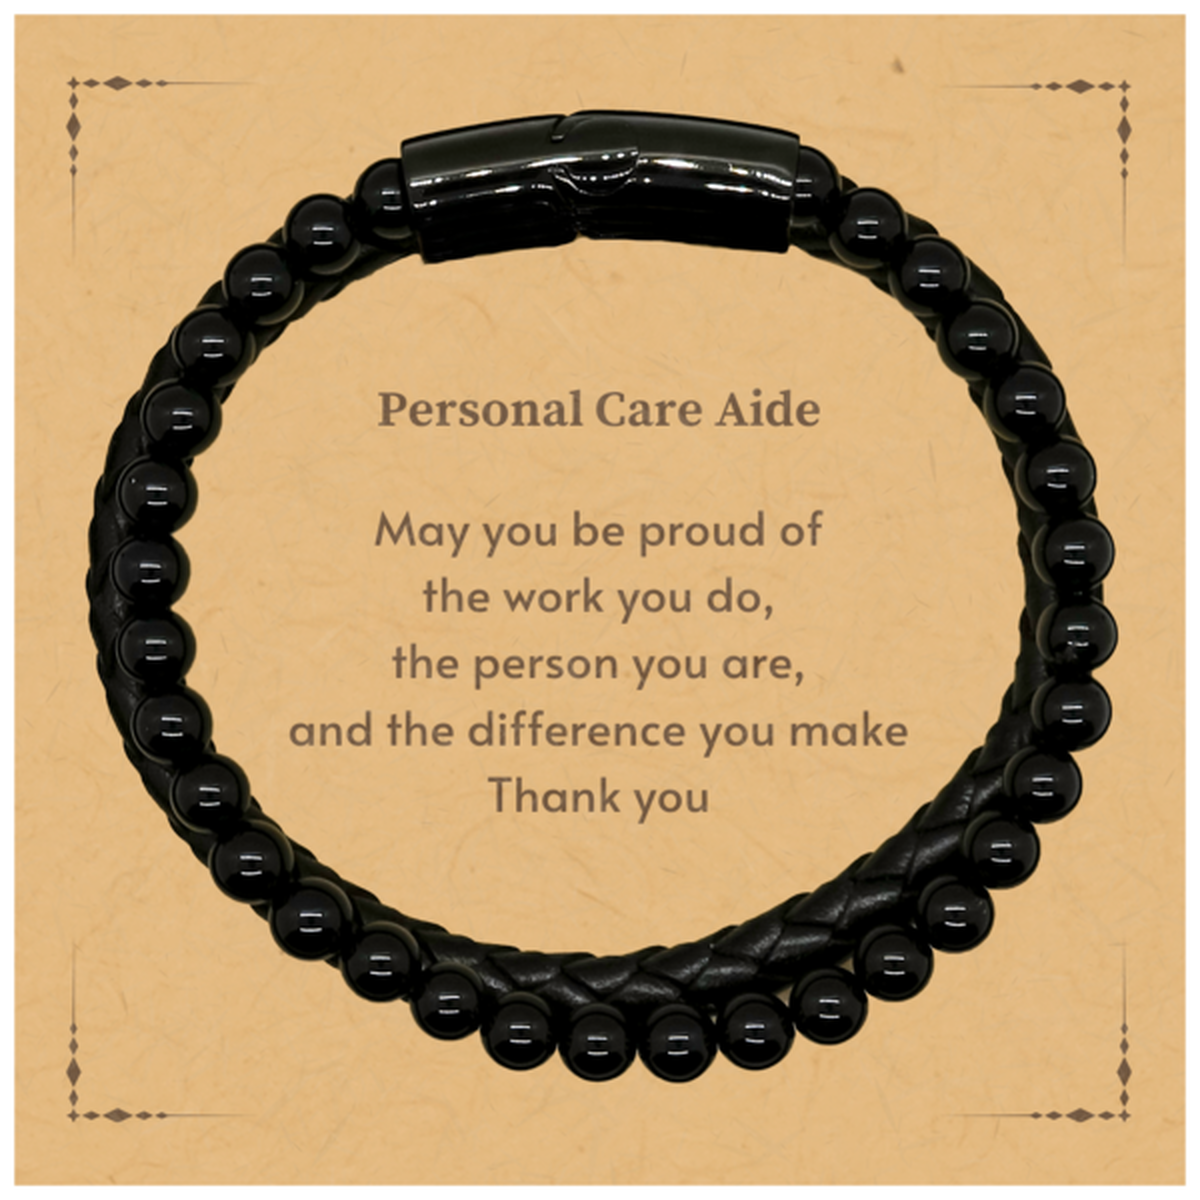 Heartwarming Stone Leather Bracelets Retirement Coworkers Gifts for Personal Care Aide, Personal Care Aide May You be proud of the work you do, the person you are Gifts for Boss Men Women Friends